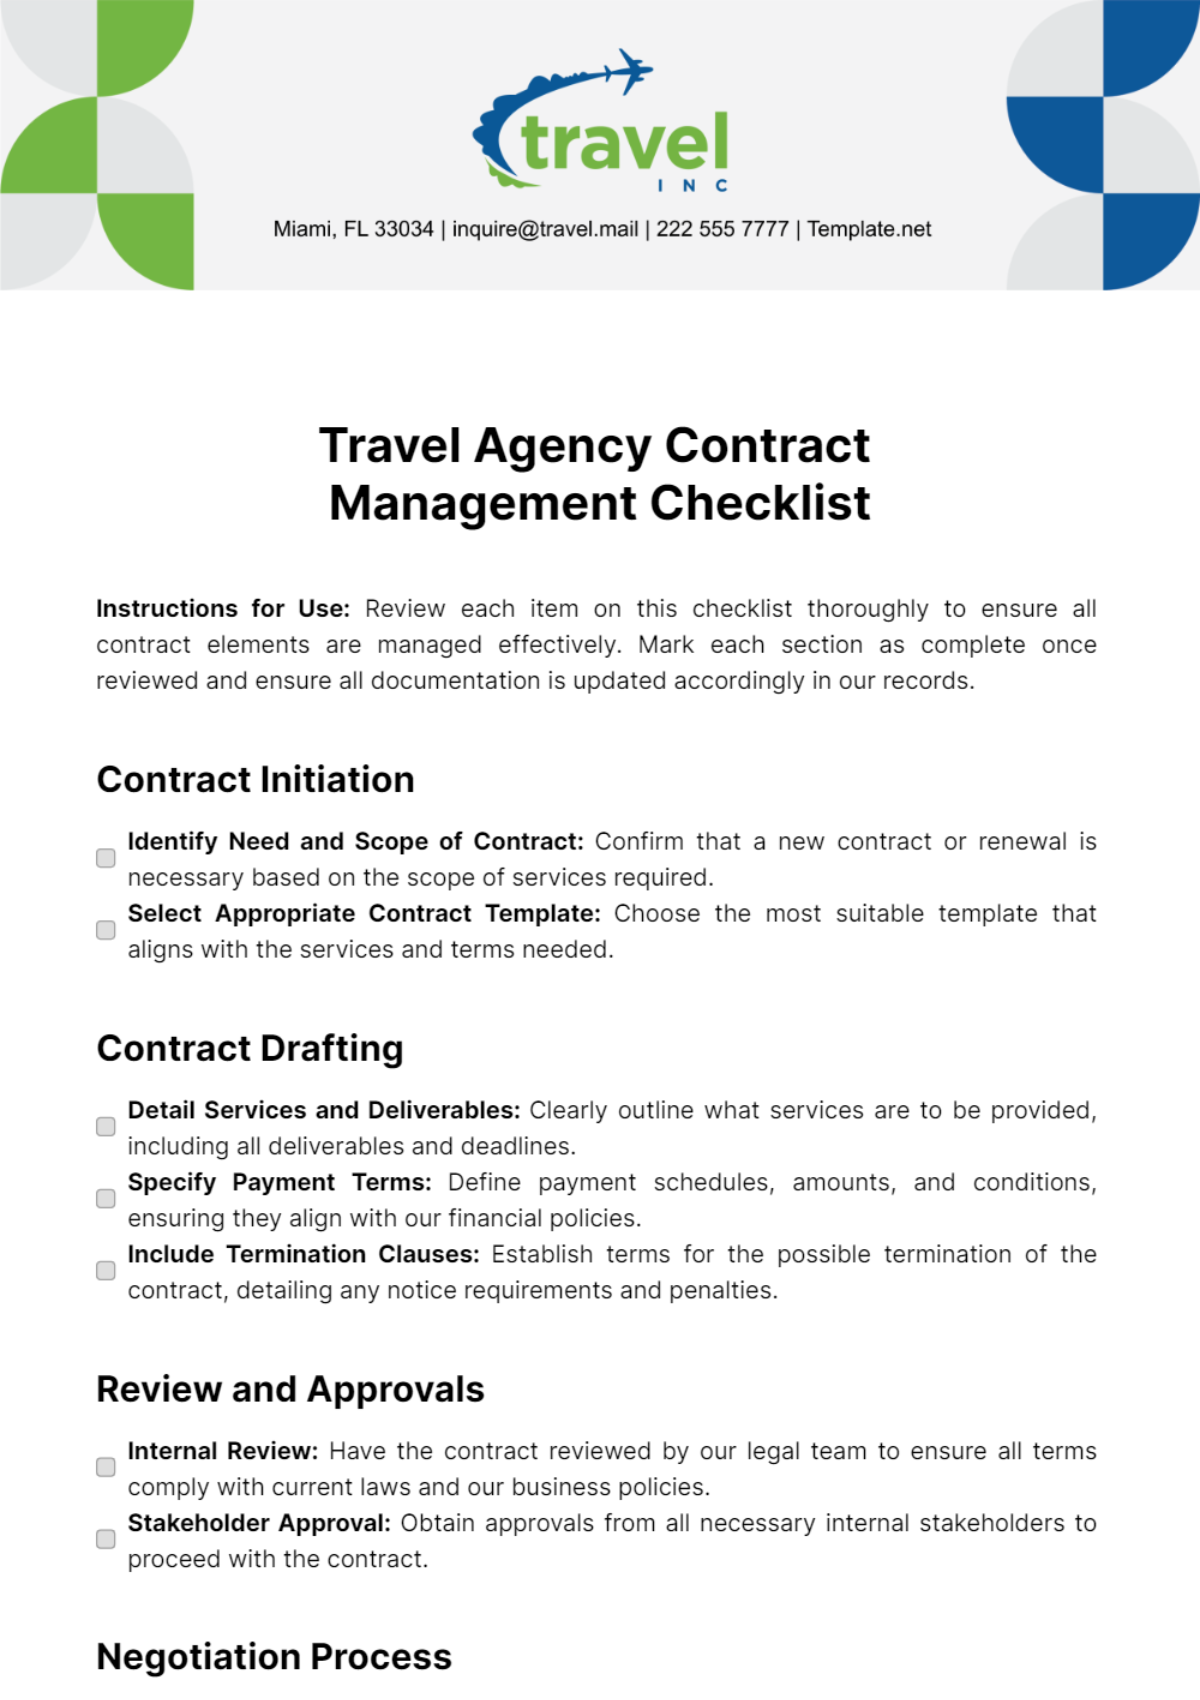 Travel Agency Contract Management Checklist Template